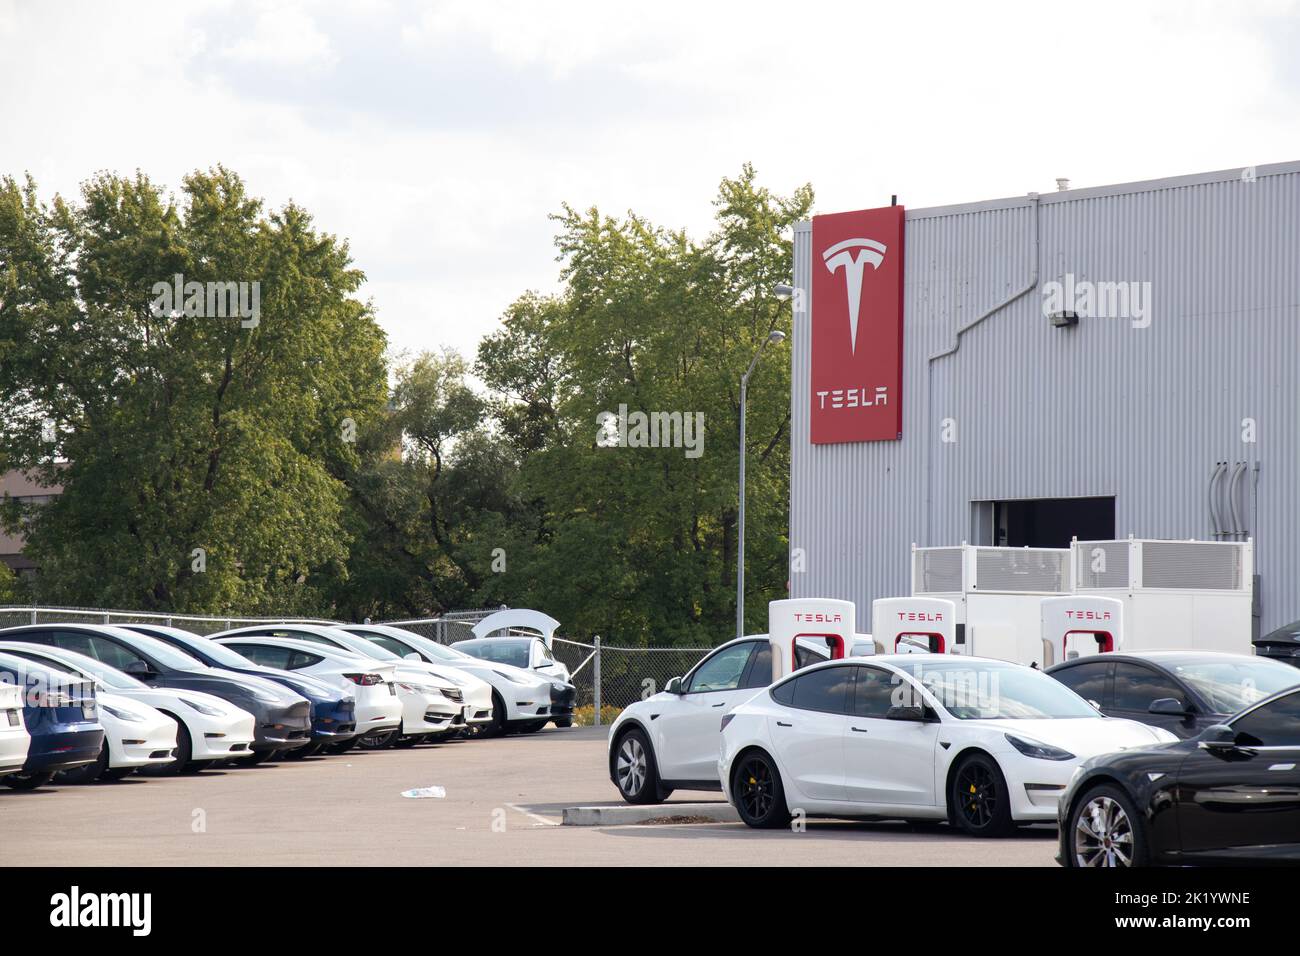 The Tesla logo is seen on the side of a Tesla dealership and Supercharger charging station, full of cars charging and new vehicles in the parking lot. Stock Photo